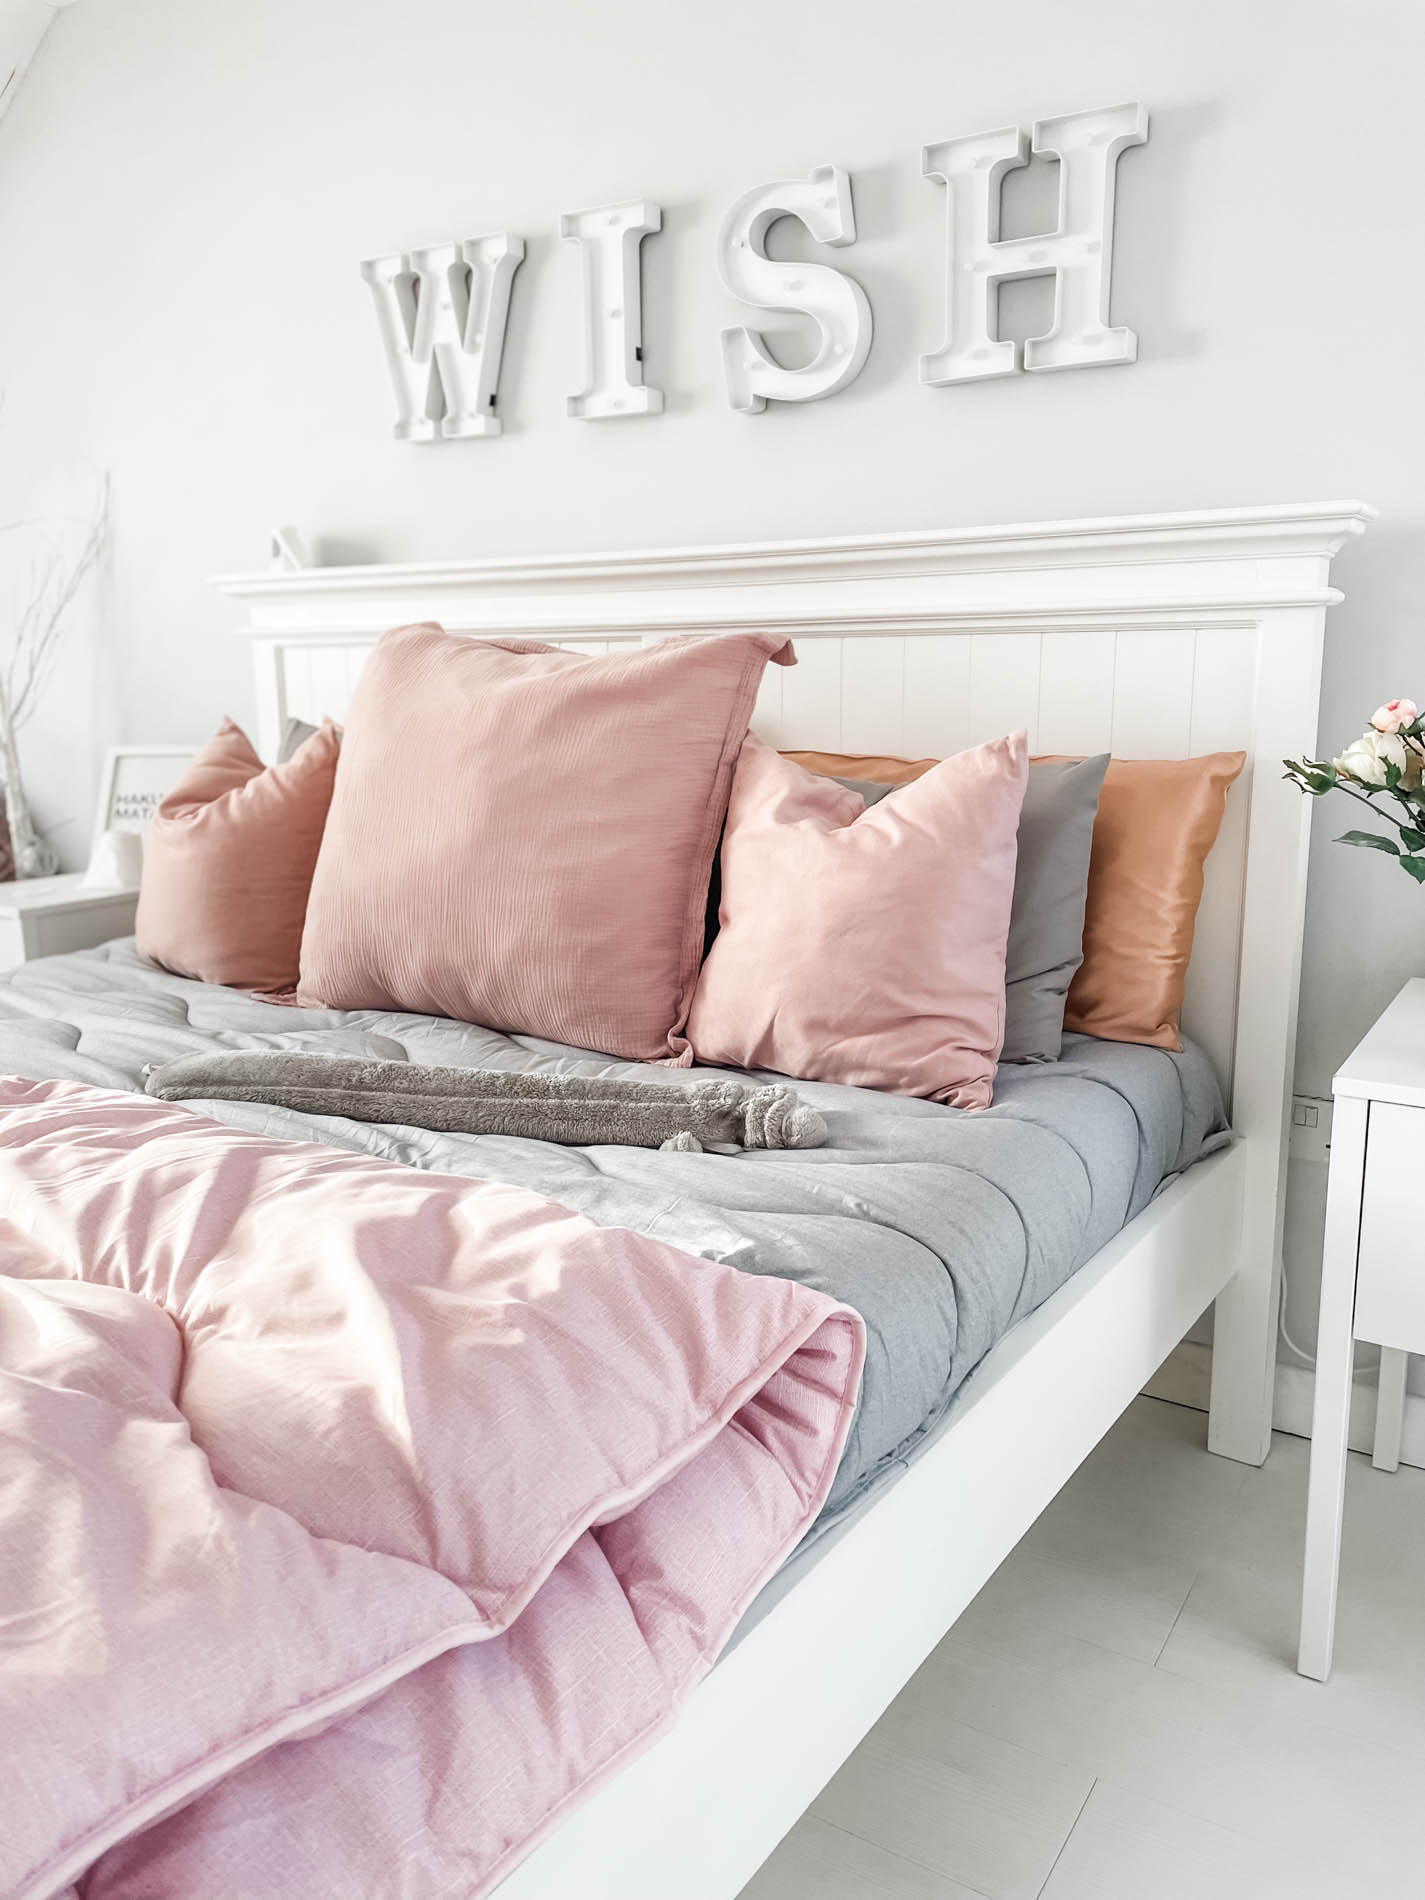 grey and pink coverless duvets on bed